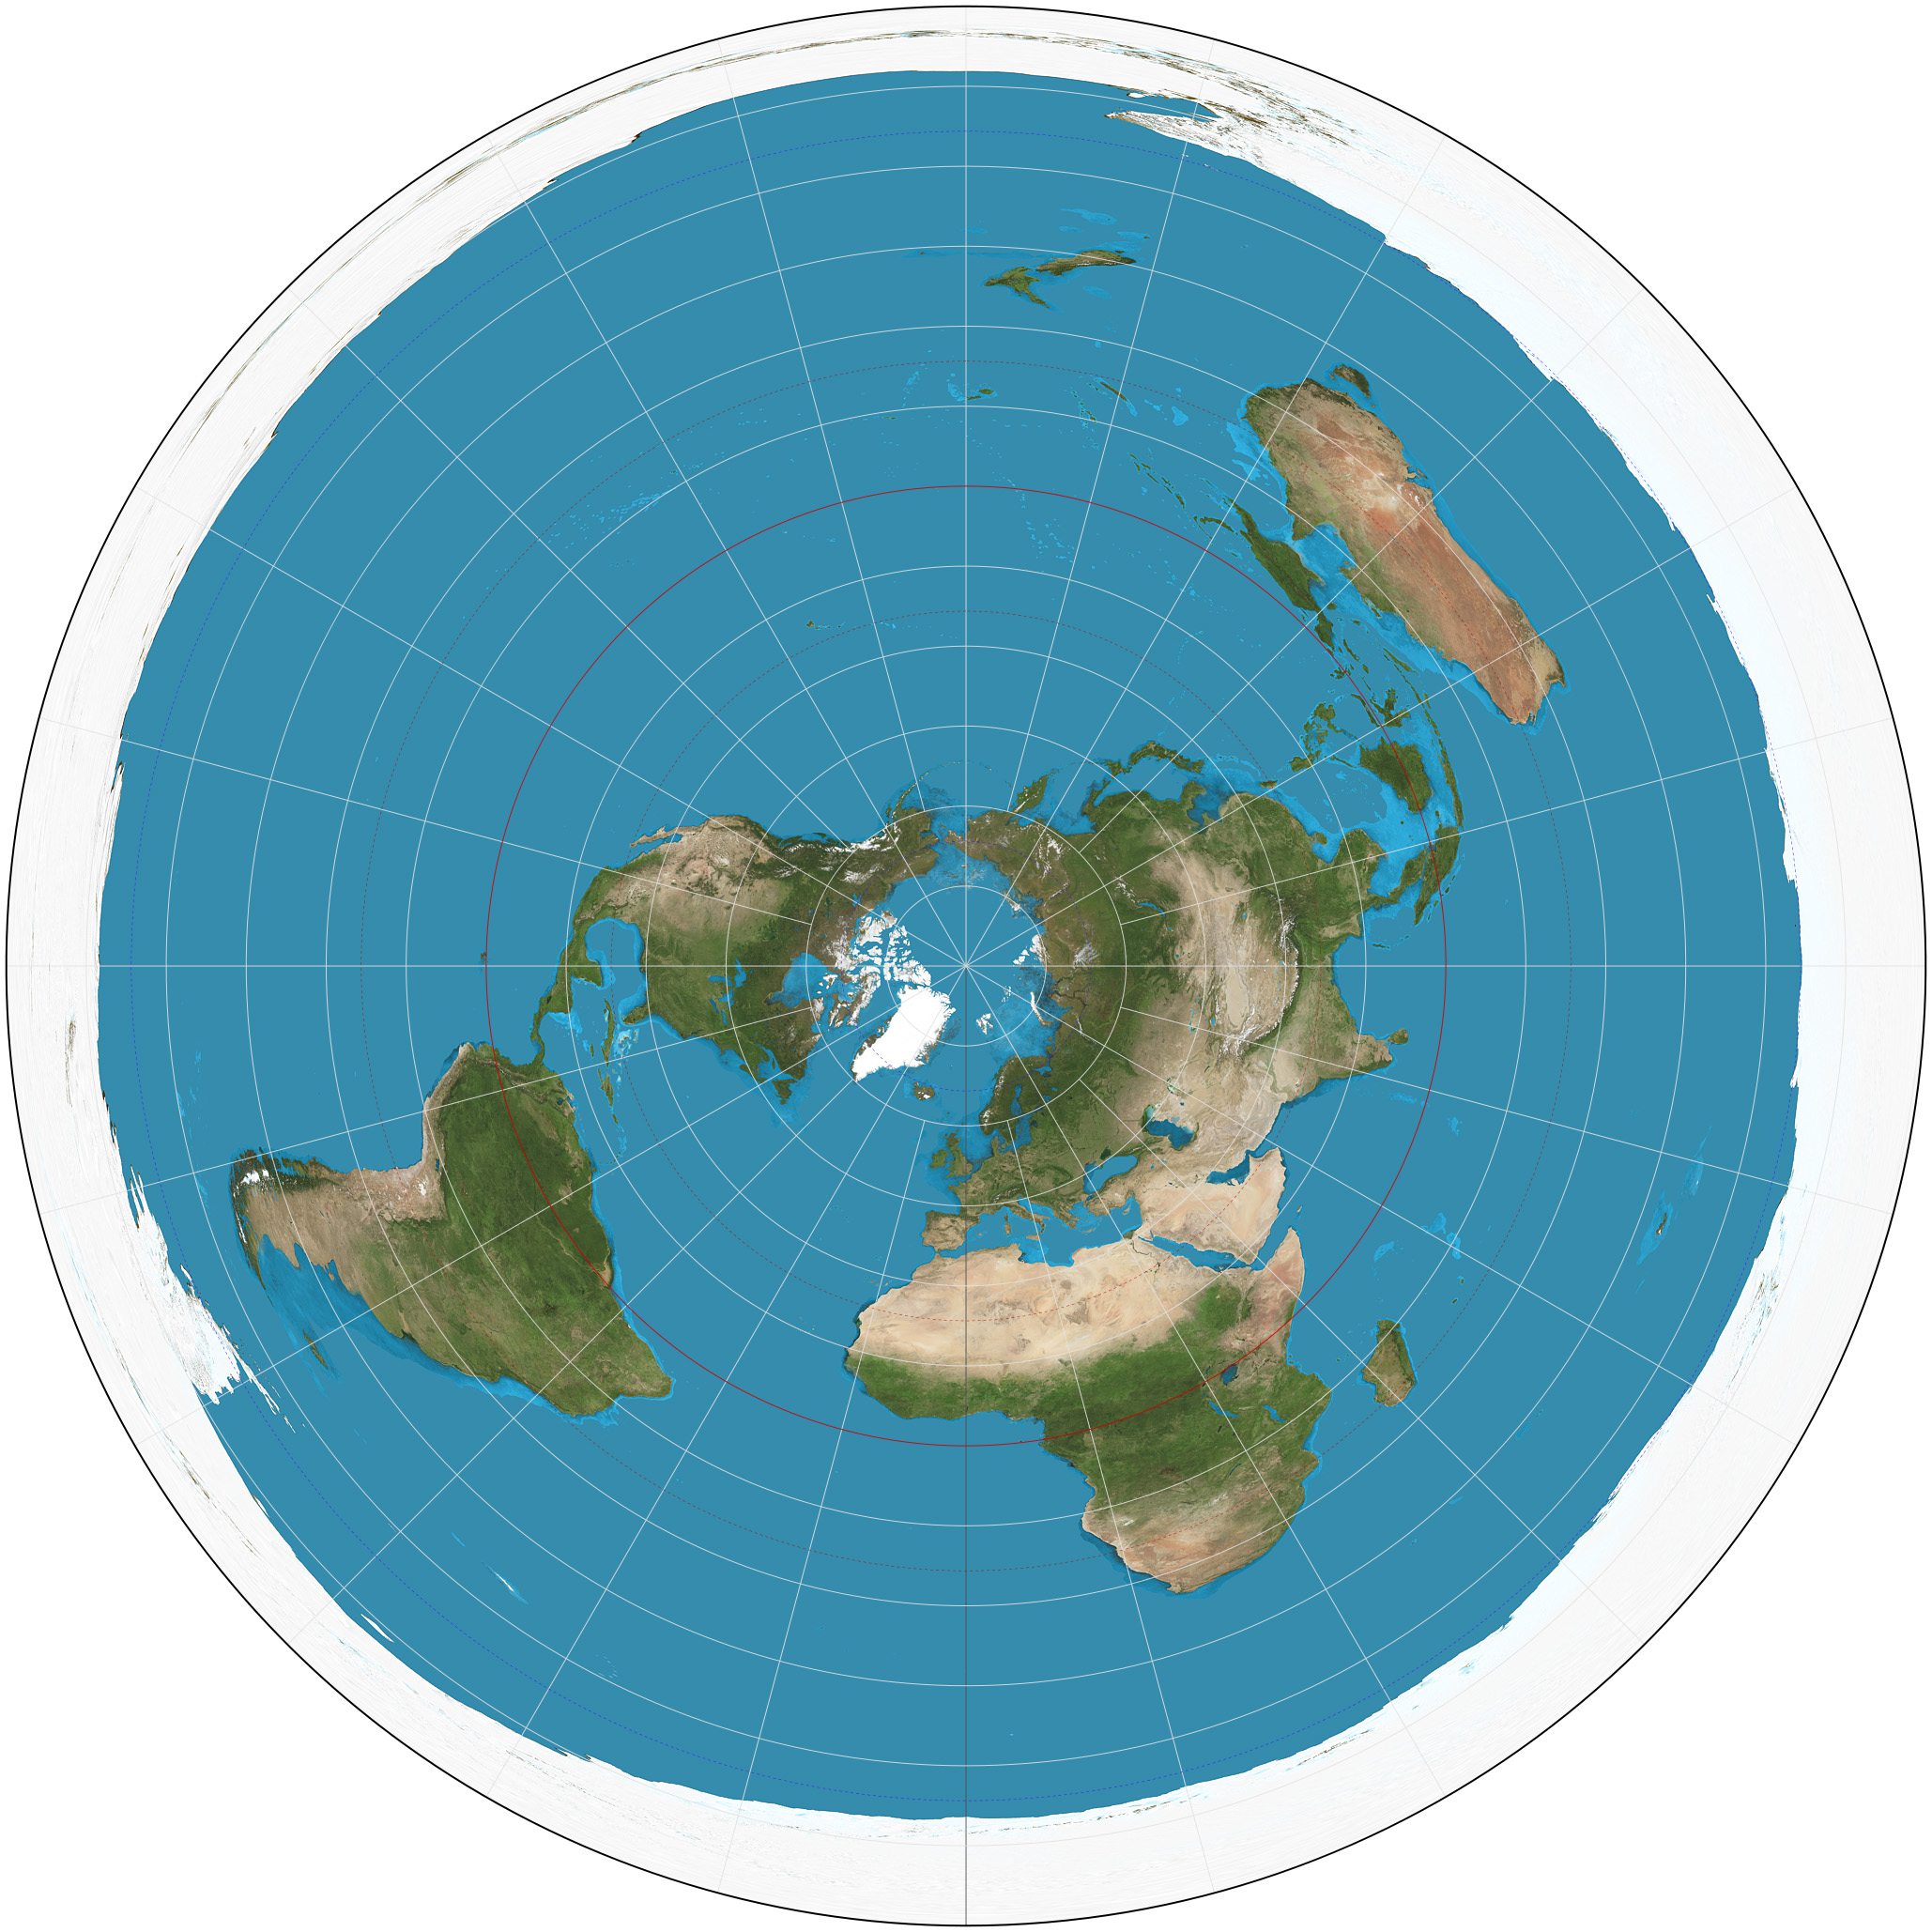 <p>Can see polar areas with less projection</p><p><strong>Advantage:</strong> true distance &nbsp; &nbsp; &nbsp; &nbsp;</p><p><strong>Disadvantage:</strong> only see part of Earth at 1 time</p>